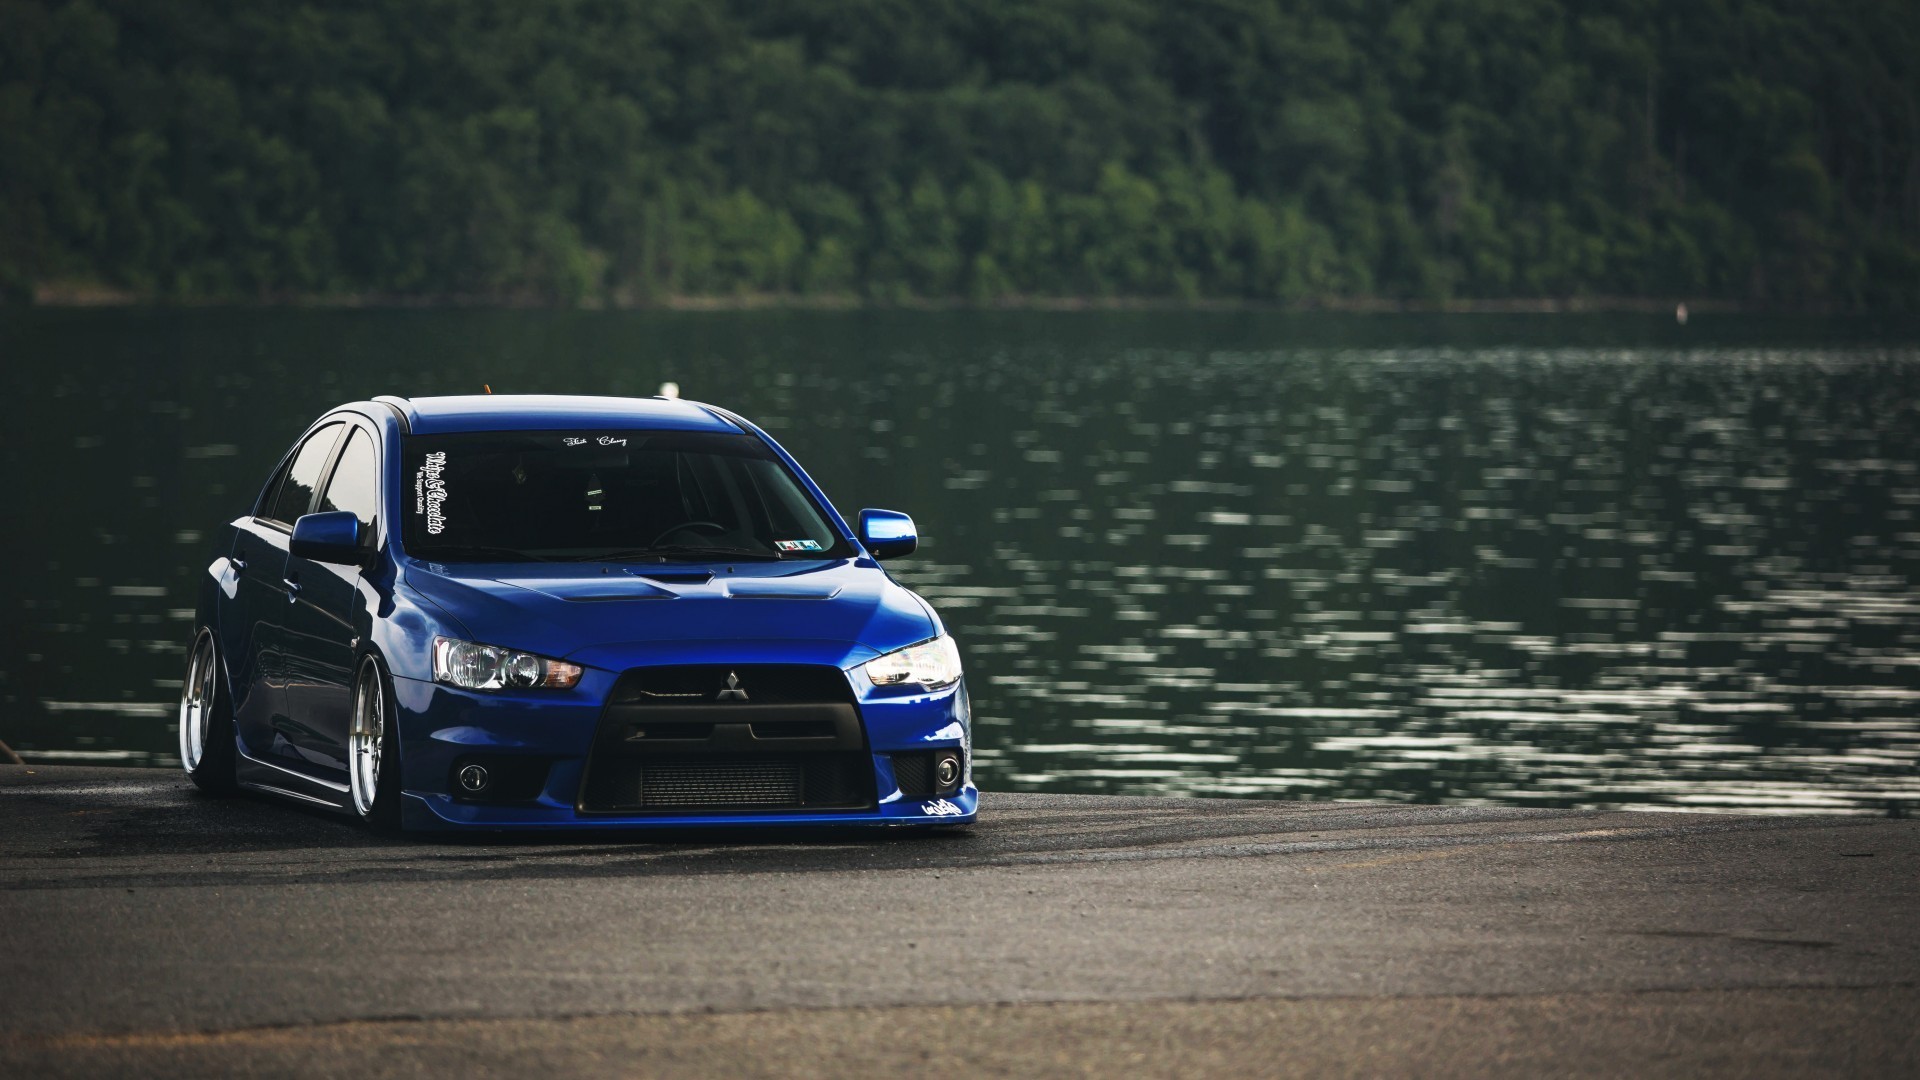 Evo X iPhone Wallpaper 46 images